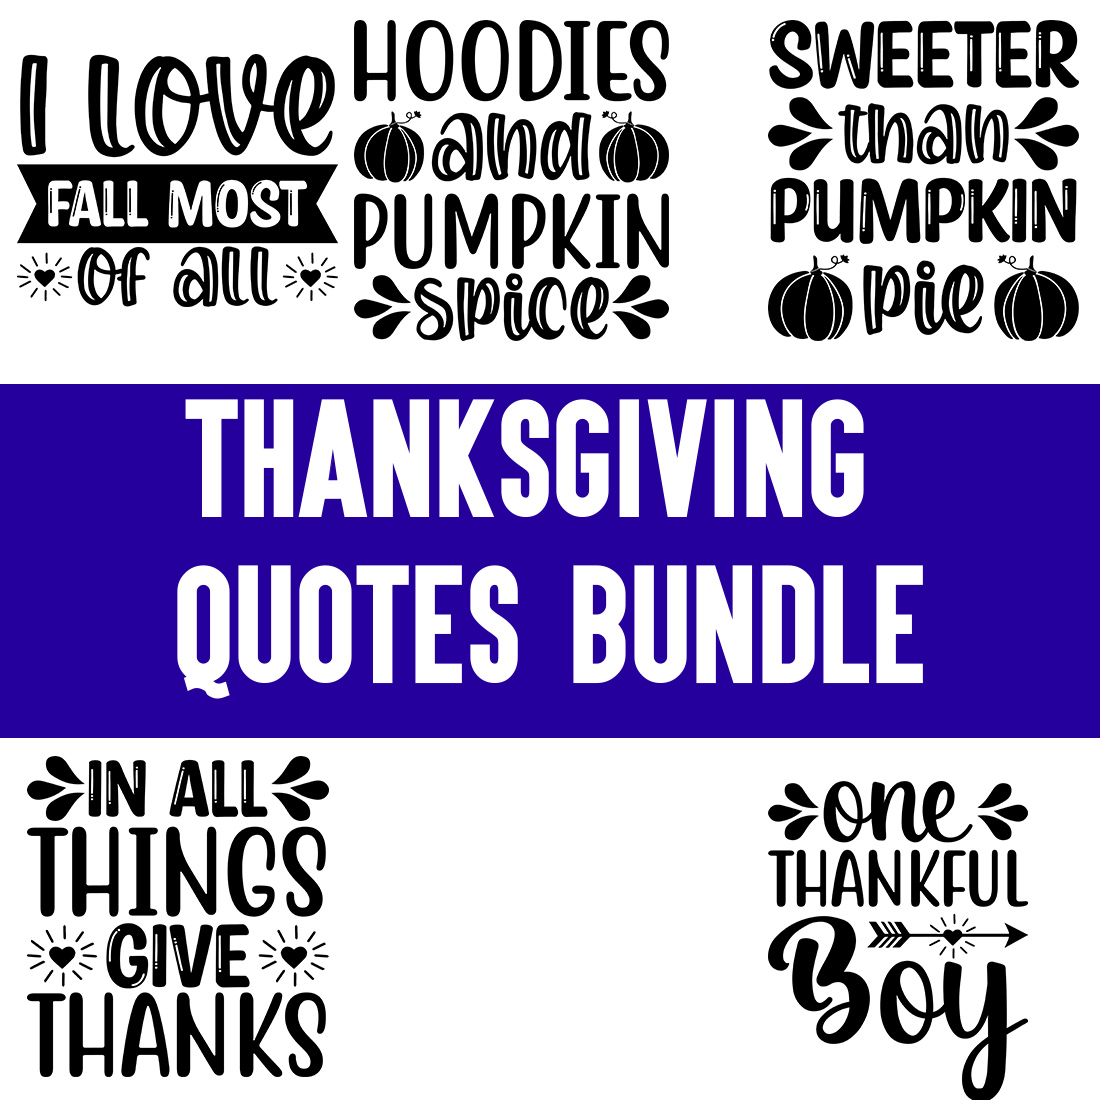 Thanksgiving Quotes Bundle preview image.